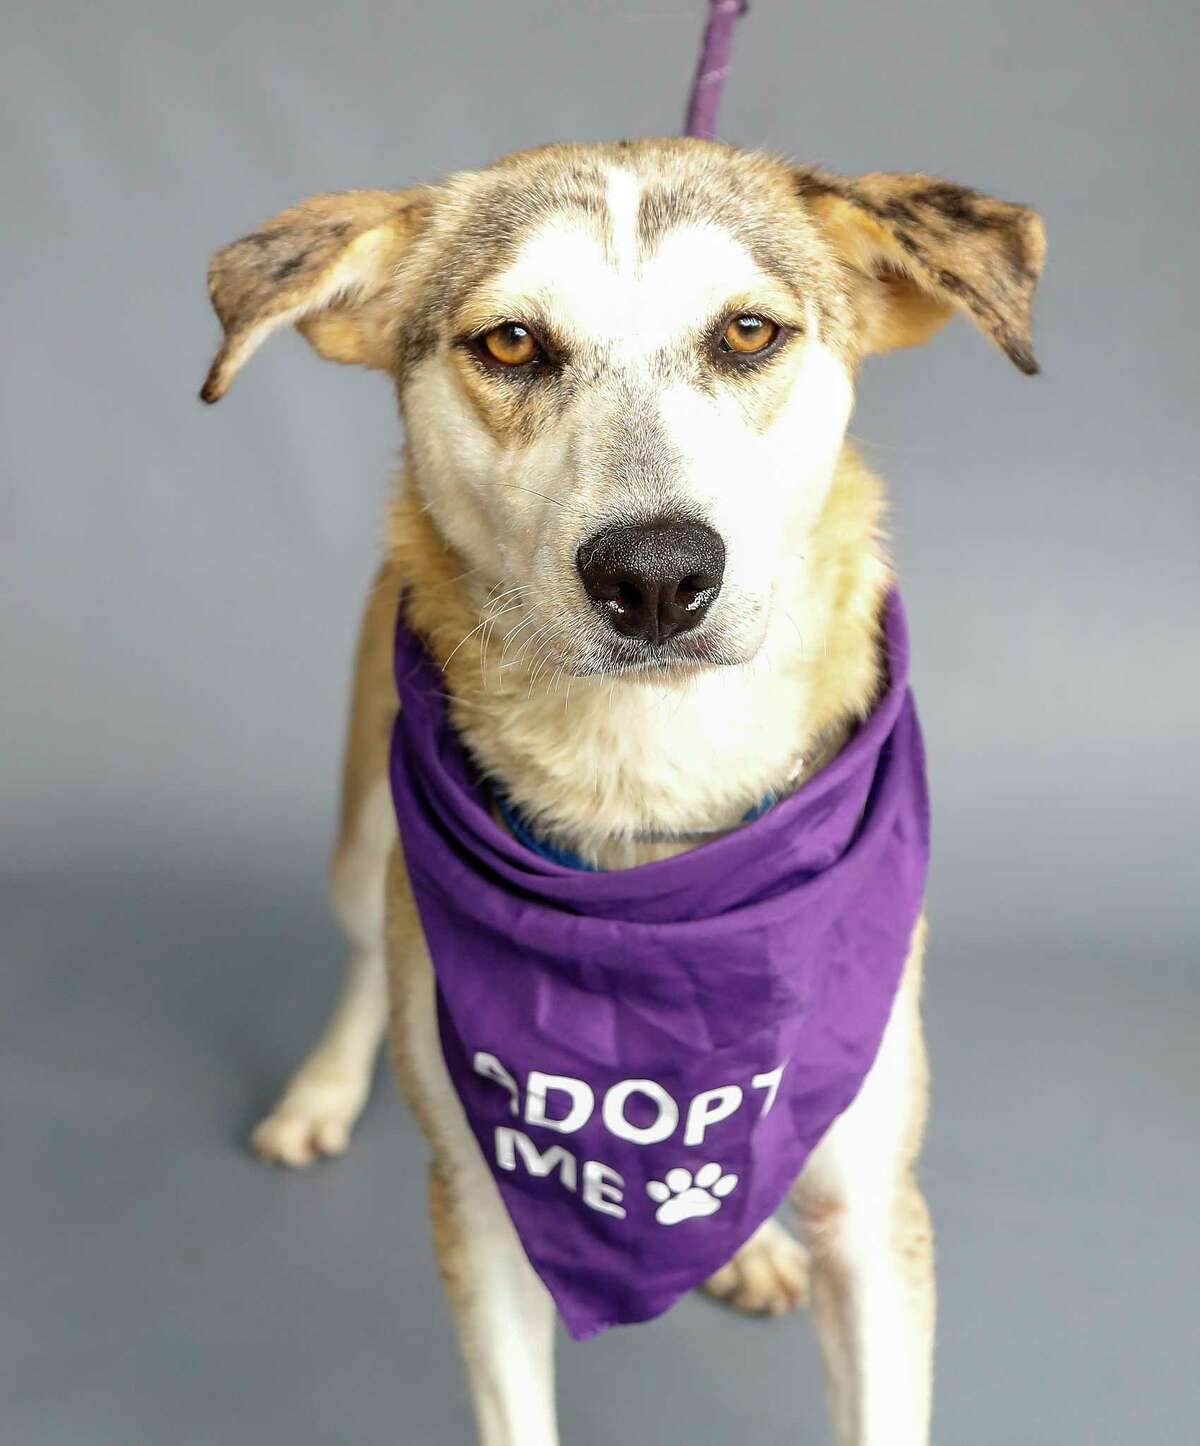 Candy (A1694228) is a 2-year-old, female, husky/Labrador mix who first came to the shelter as an "unsocialized street dog." But Candy has made incredible progress and is ready to find her new home. She's a little sad now that her best dog friend was recently adopted out and cannot wait to be someone's pet. She is good with other dogs and shelter officials think she will do well with another confident dog.